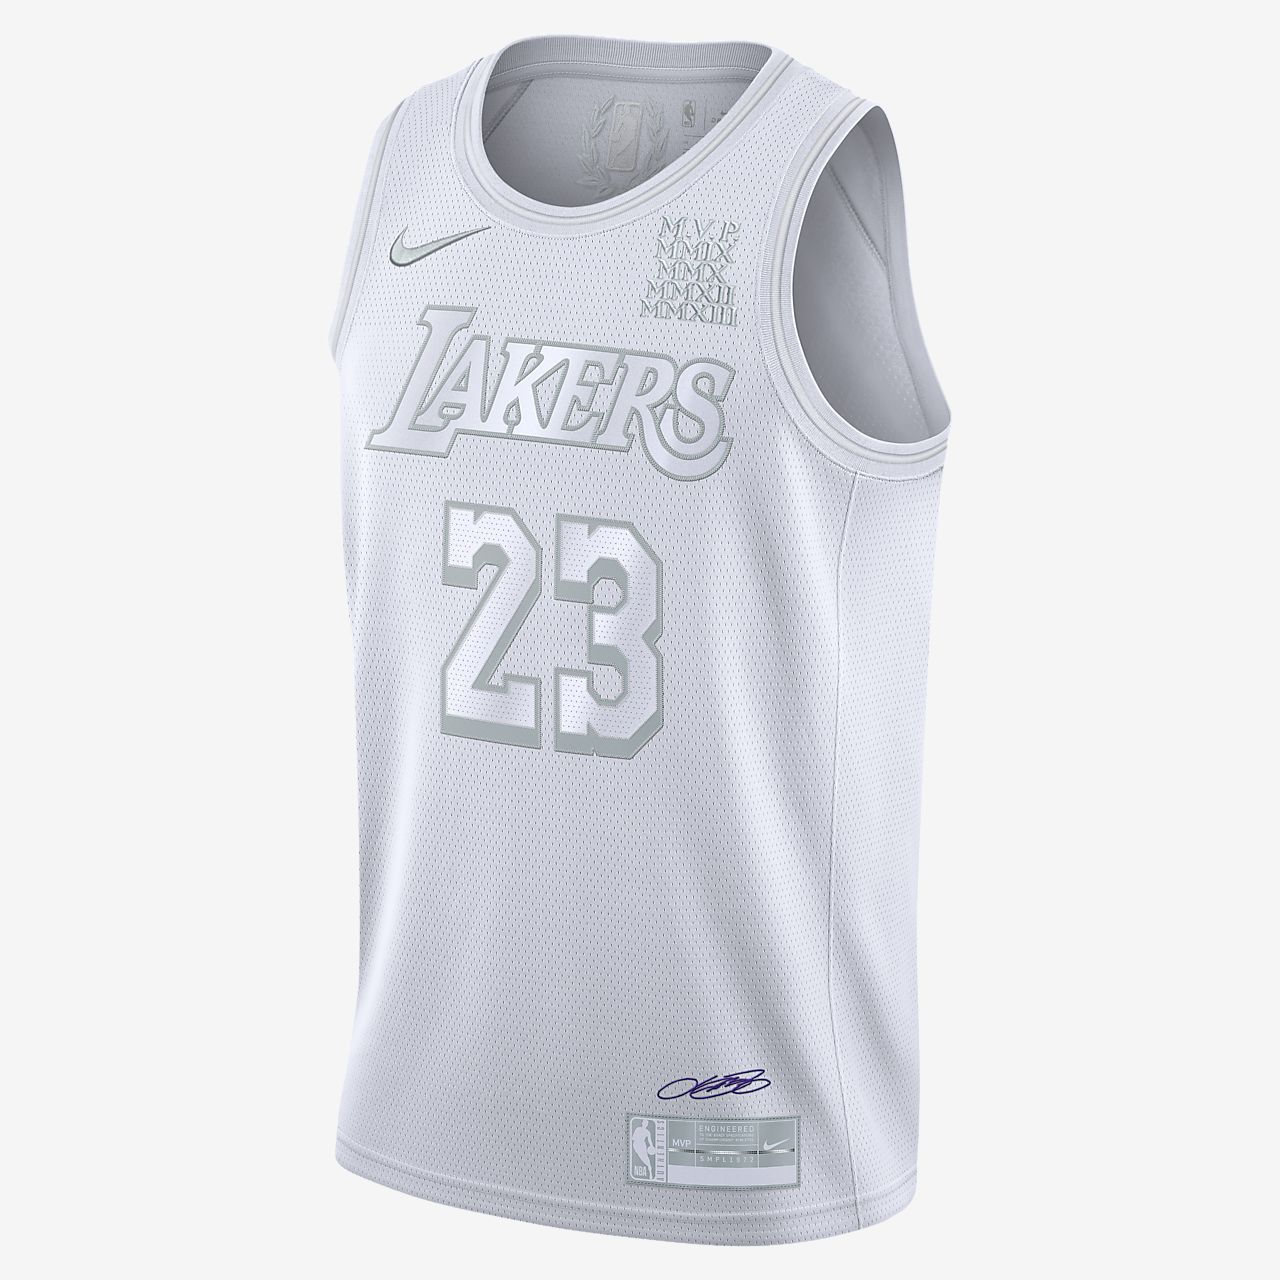 lebron james lakers jersey canada